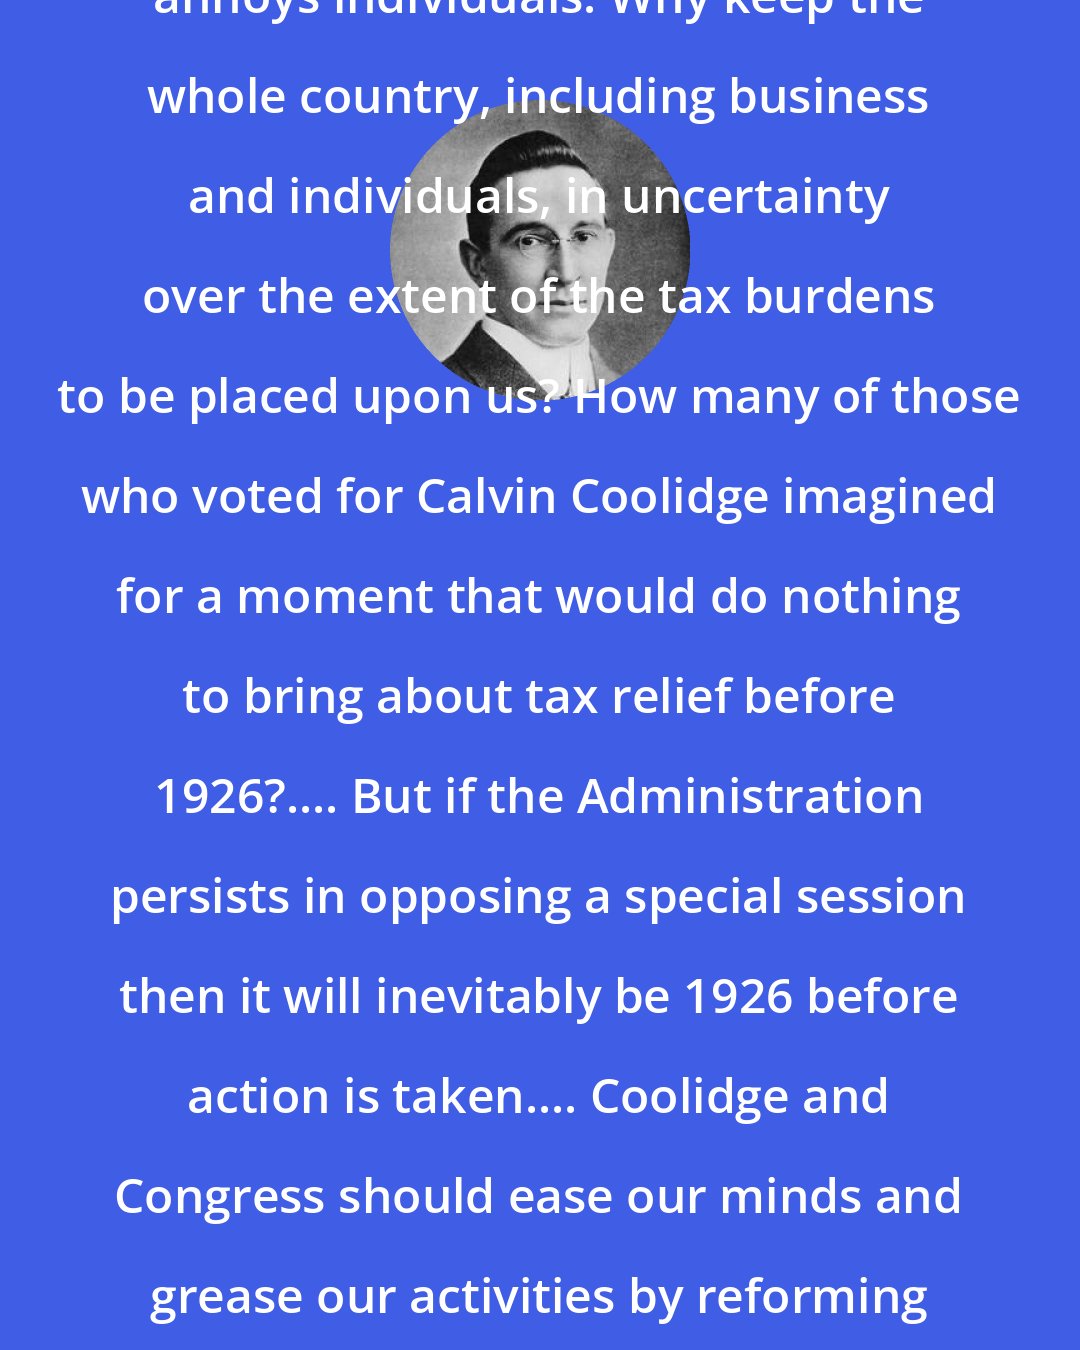 B. C. Forbes: Uncertainty hurts business. It annoys individuals. Why keep the whole country, including business and individuals, in uncertainty over the extent of the tax burdens to be placed upon us? How many of those who voted for Calvin Coolidge imagined for a moment that would do nothing to bring about tax relief before 1926?.... But if the Administration persists in opposing a special session then it will inevitably be 1926 before action is taken.... Coolidge and Congress should ease our minds and grease our activities by reforming and reducing taxation as soon as feasible after March 4.